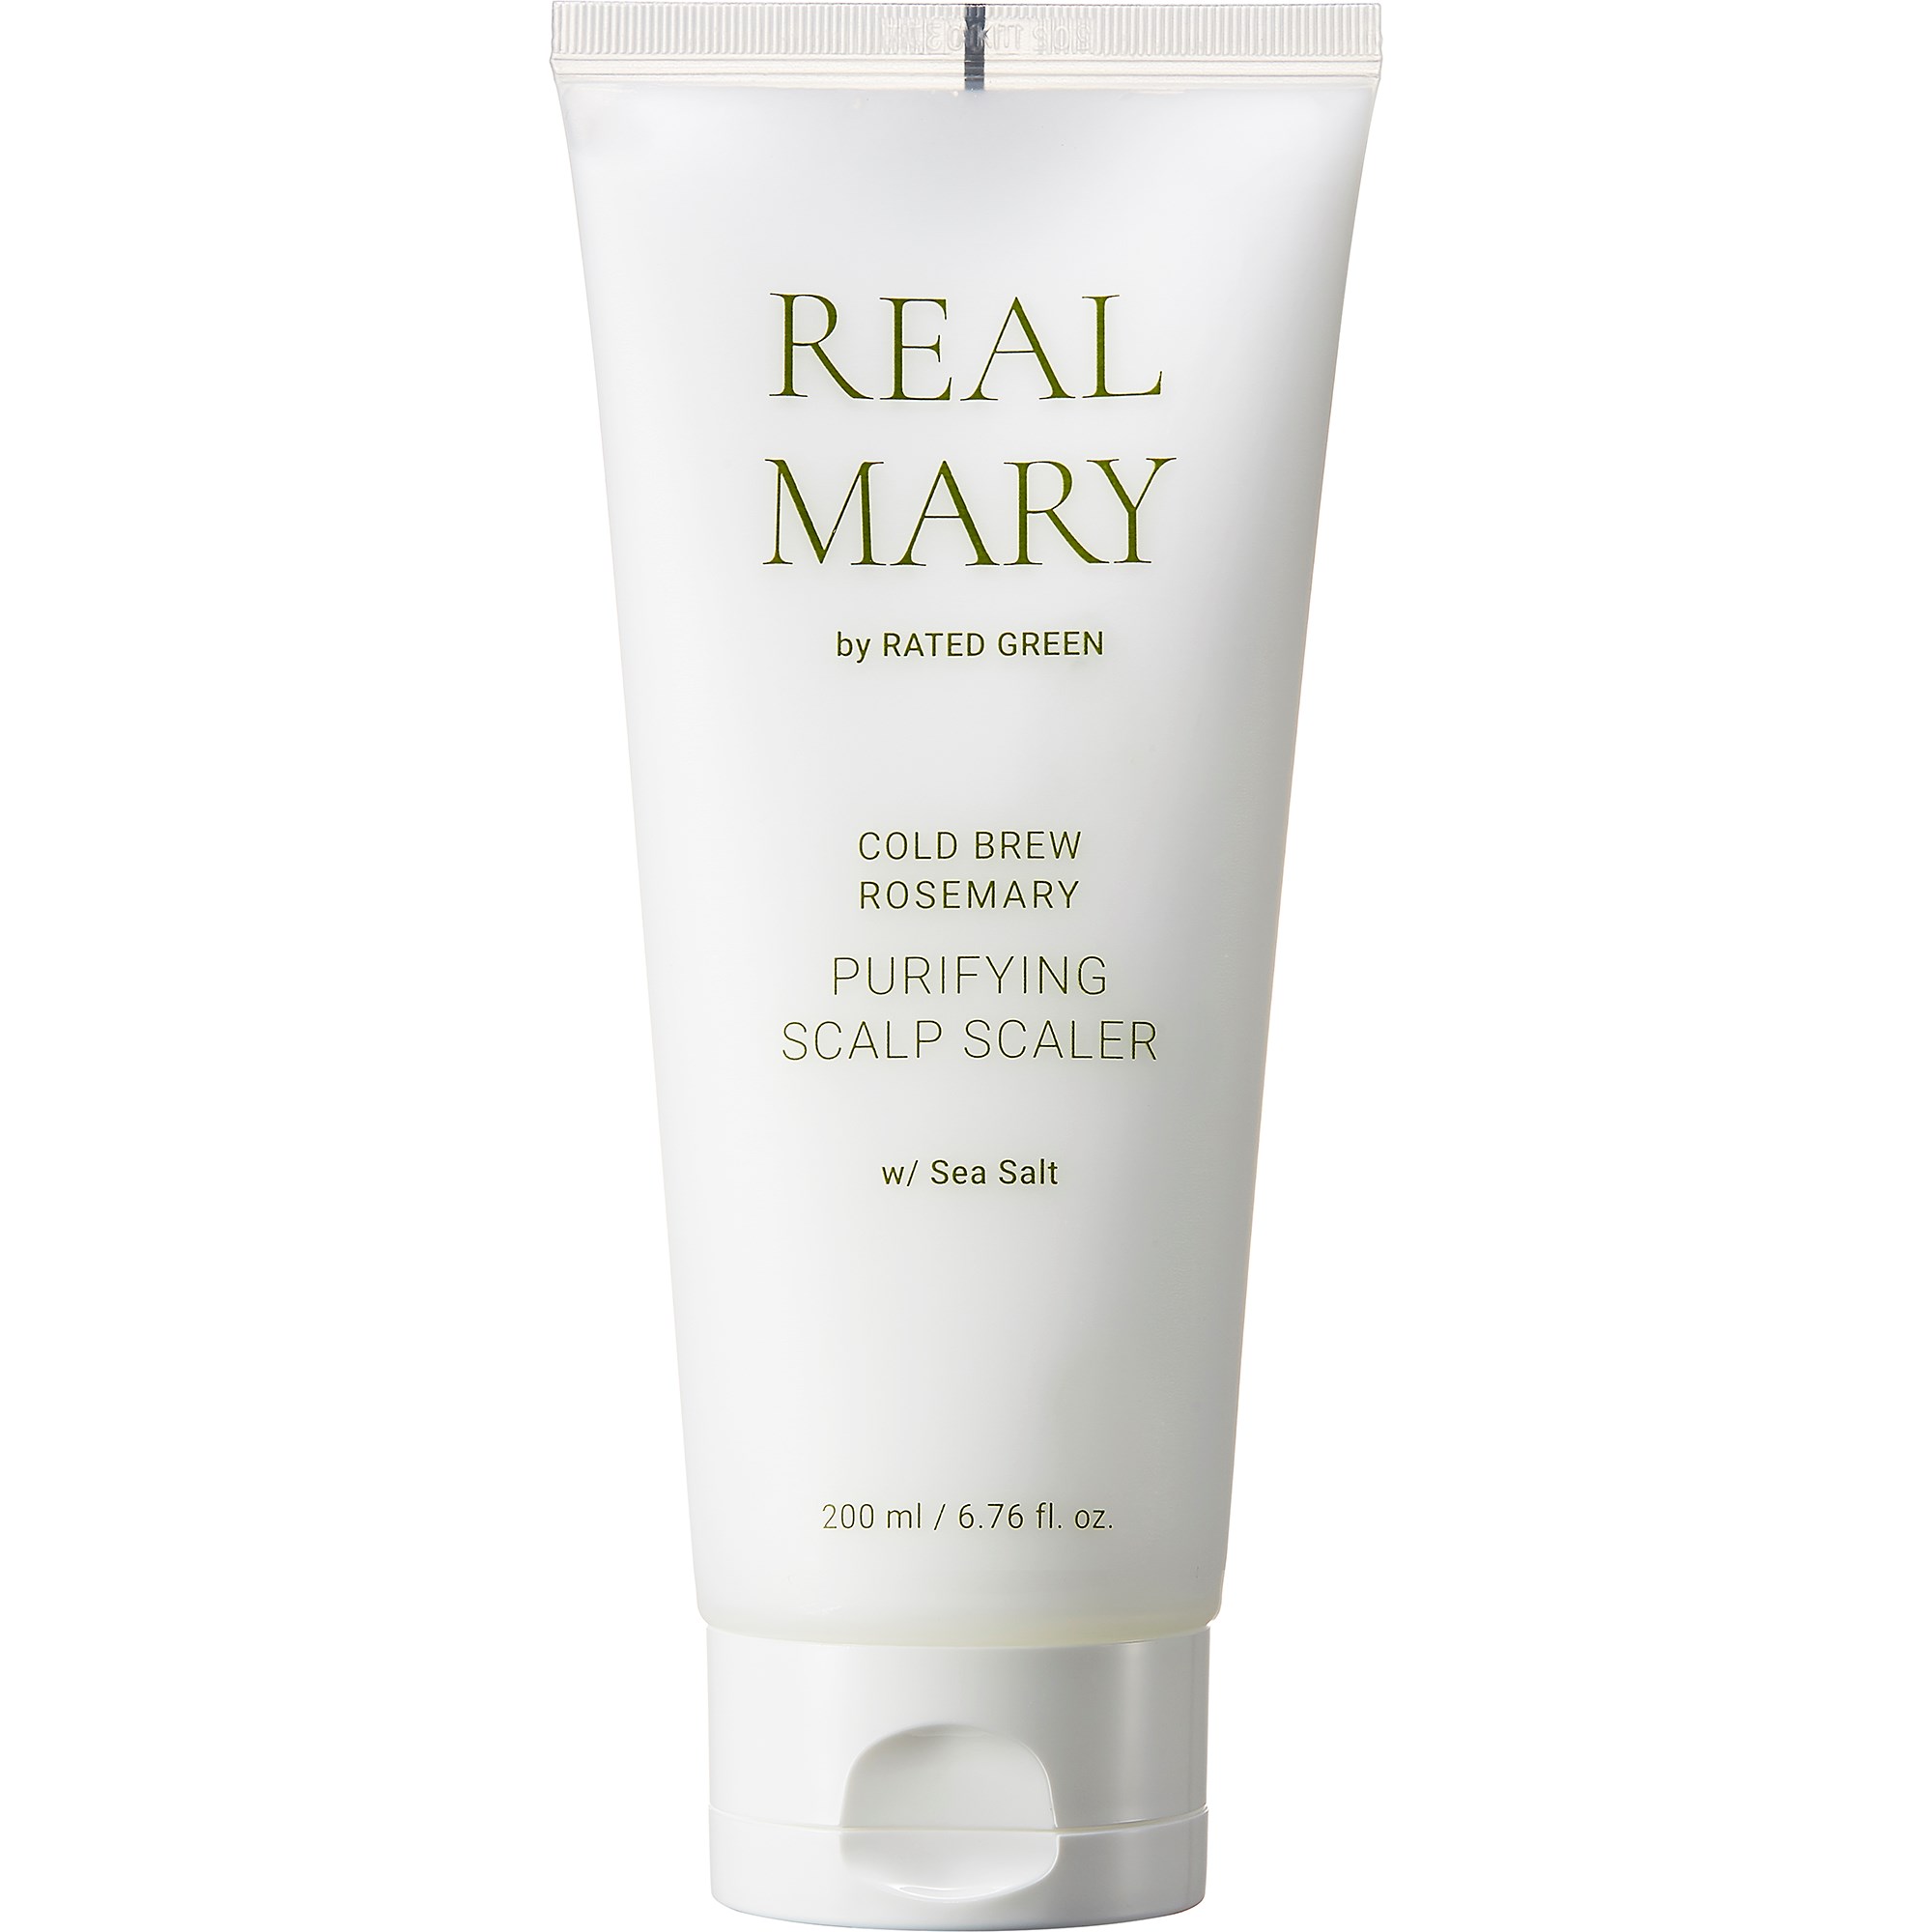 Bilde av Rated Green Real Mary Cold Brew Rosemary Purifying Scalp Scaler (sea S